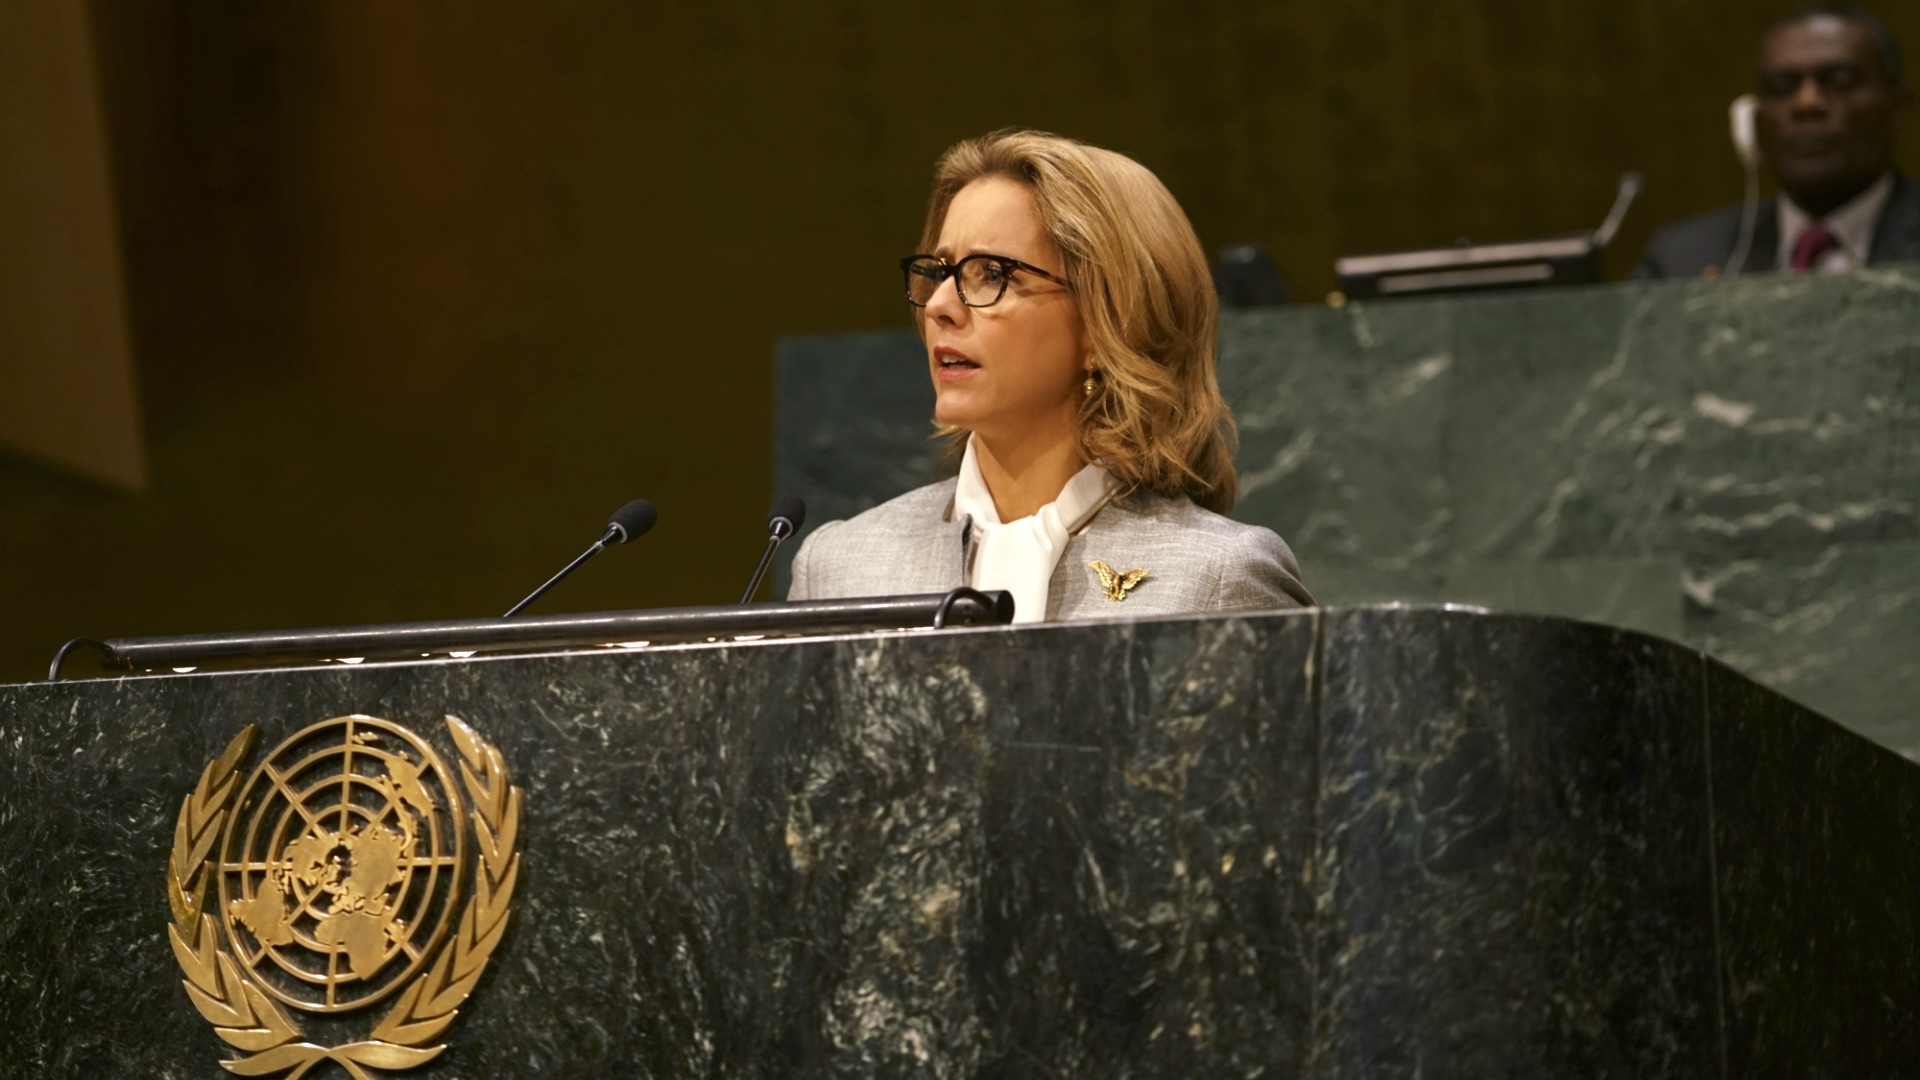 Bess rallied members of the United Nations to join the fight against terrorism.